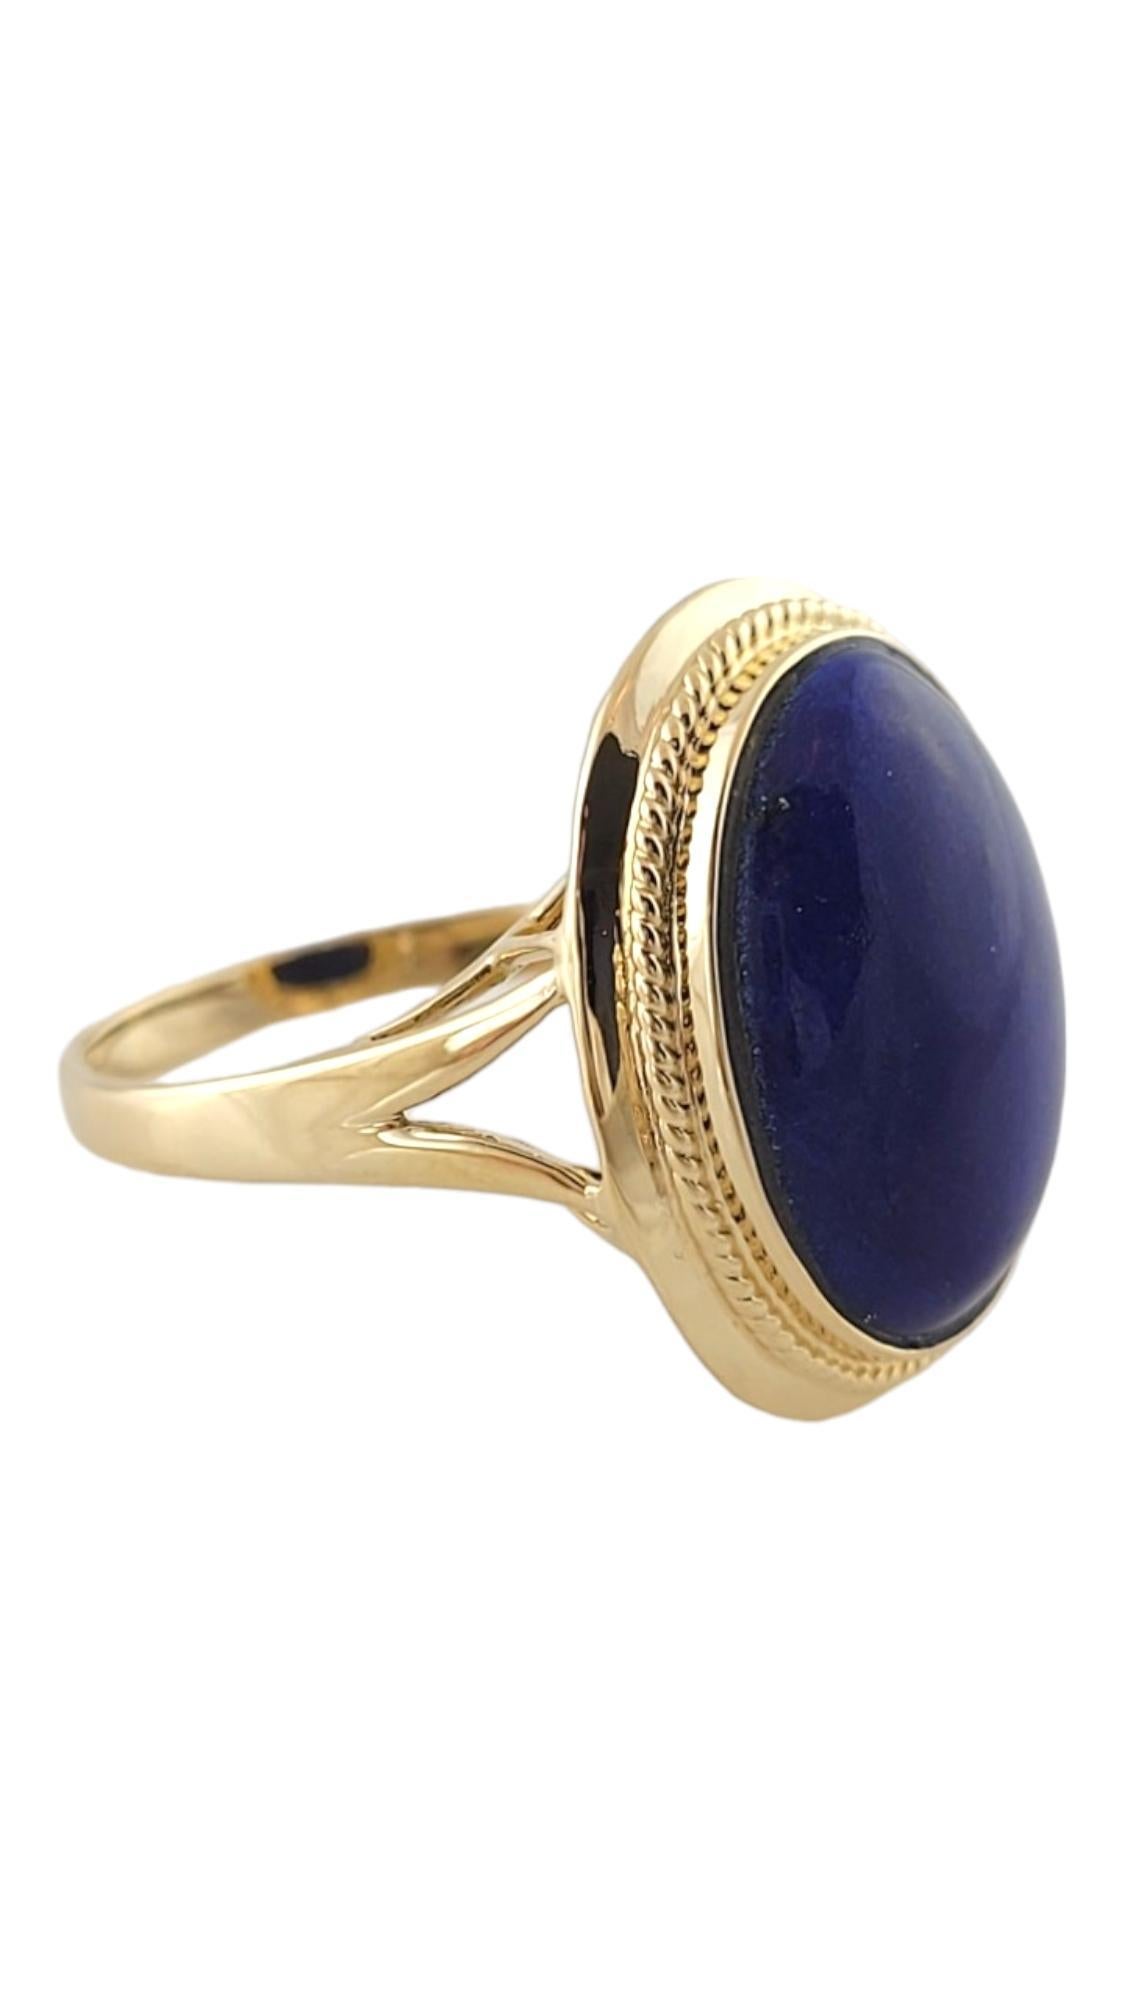 14K Yellow Gold Blue Lapis Ring Size 7.25

This gorgeous 14K yellow gold ring features a stunning blue lapis stone in the center!

Ring size: 7.25
Shank: 2.1mm
Front: 19.6mm X 16.1mm X 8.1mm

Weight: 3.1 dwt/ 4.8 g

Hallmark: 585 14K

Very good